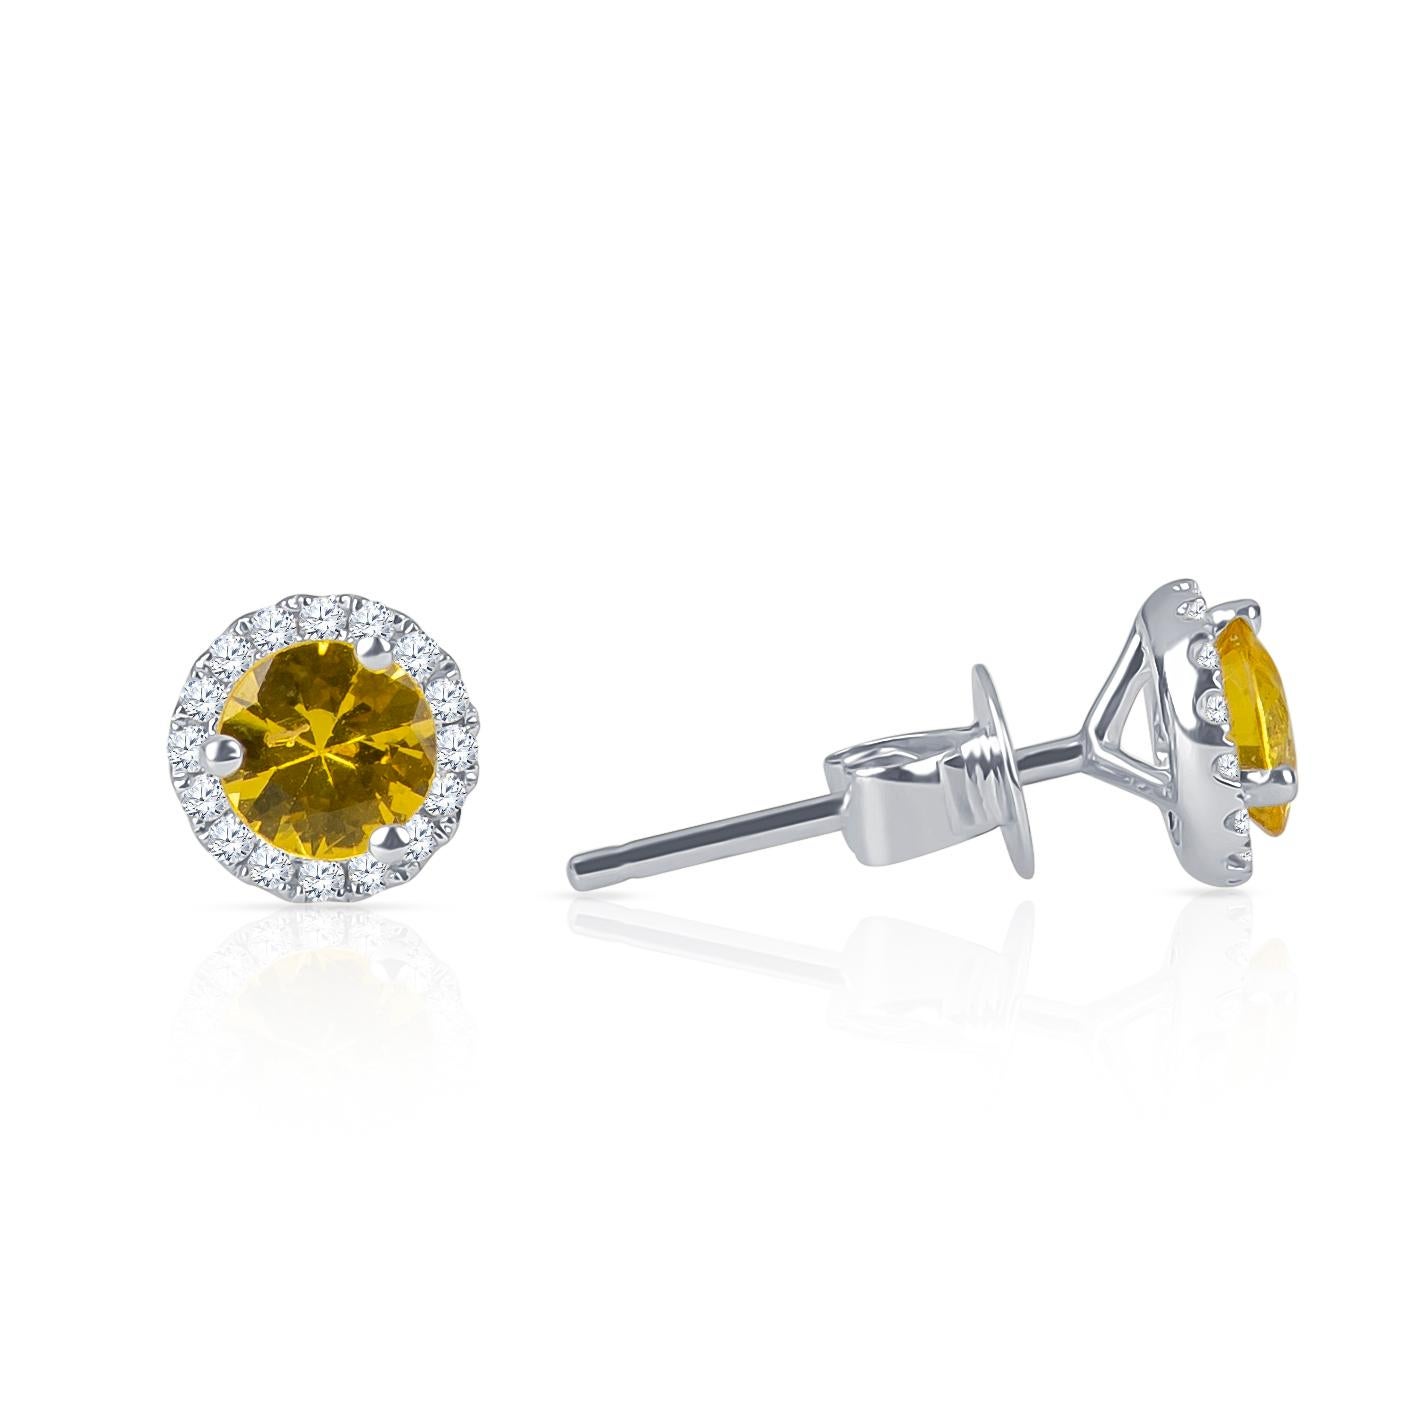 Beautiful pair of 0.75 carats total weight in fine natural round yellow sapphire stud earrings with 0.16 carats total of round brilliant cut diamonds in halo form. Stones are set in 18K white gold with friction posts and backs. 

Diamond quality: